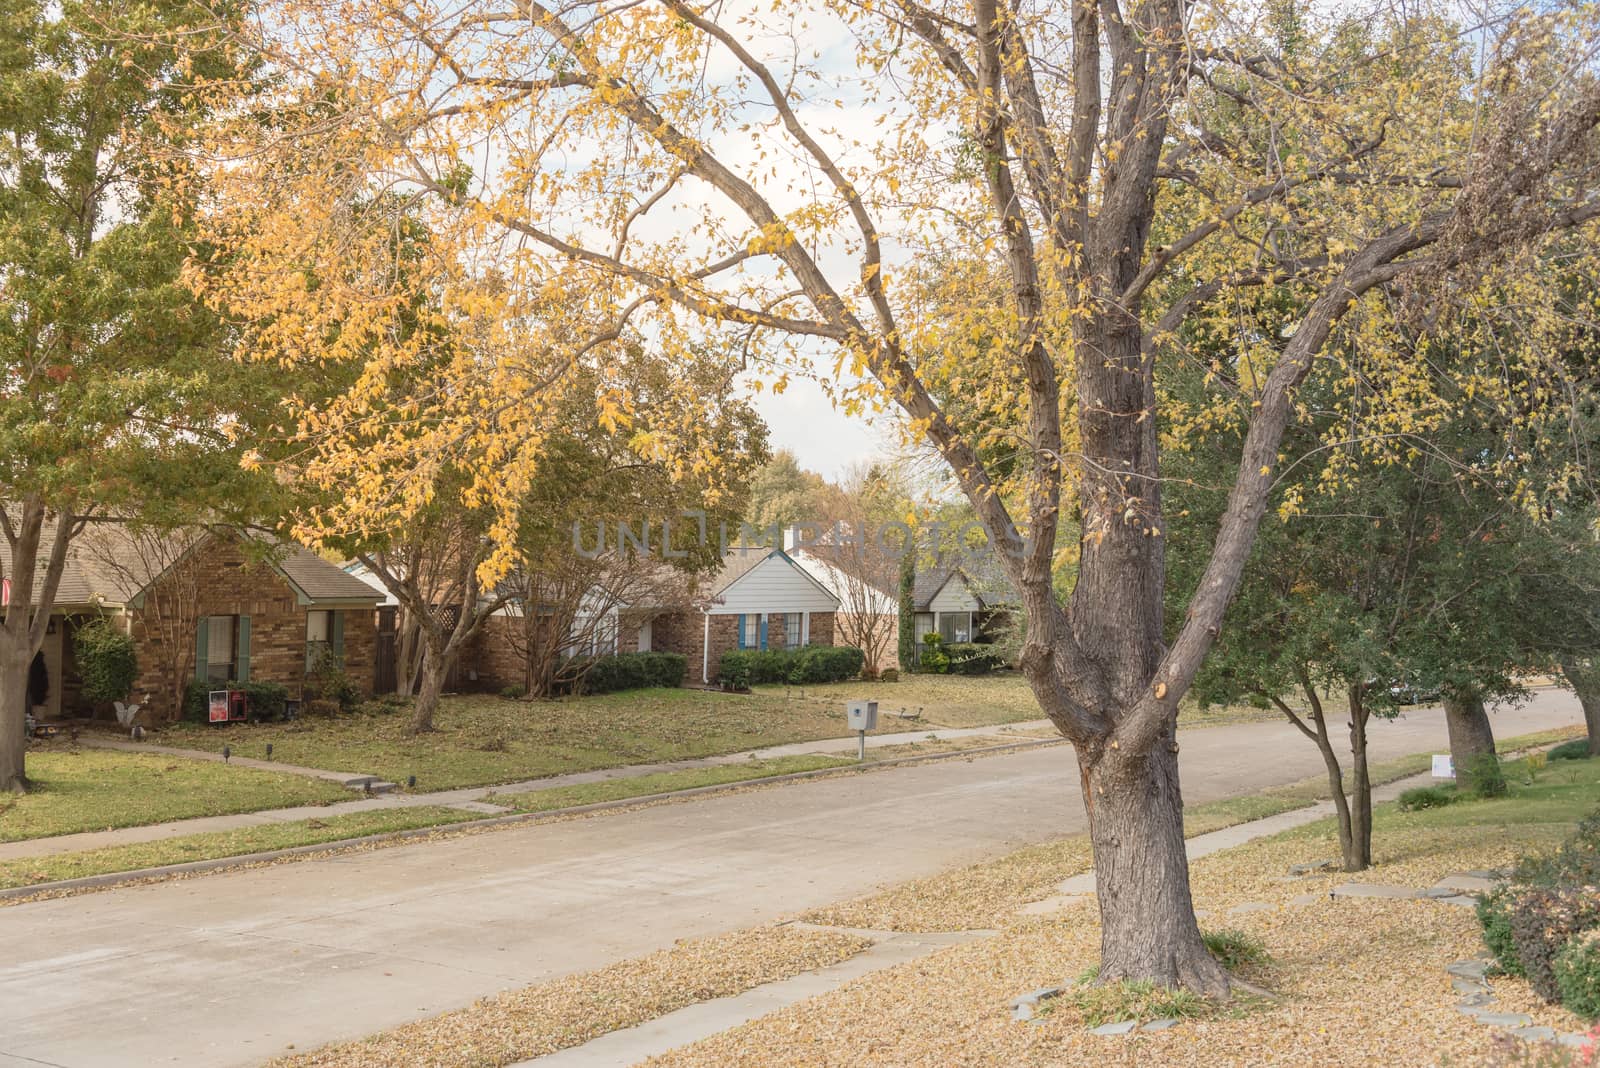 Almost bare tree yellow fall leaves at front yard of residential house in suburbs of Dallas. Quite neighborhood with row of typical one story house covered with dried autumn leaves